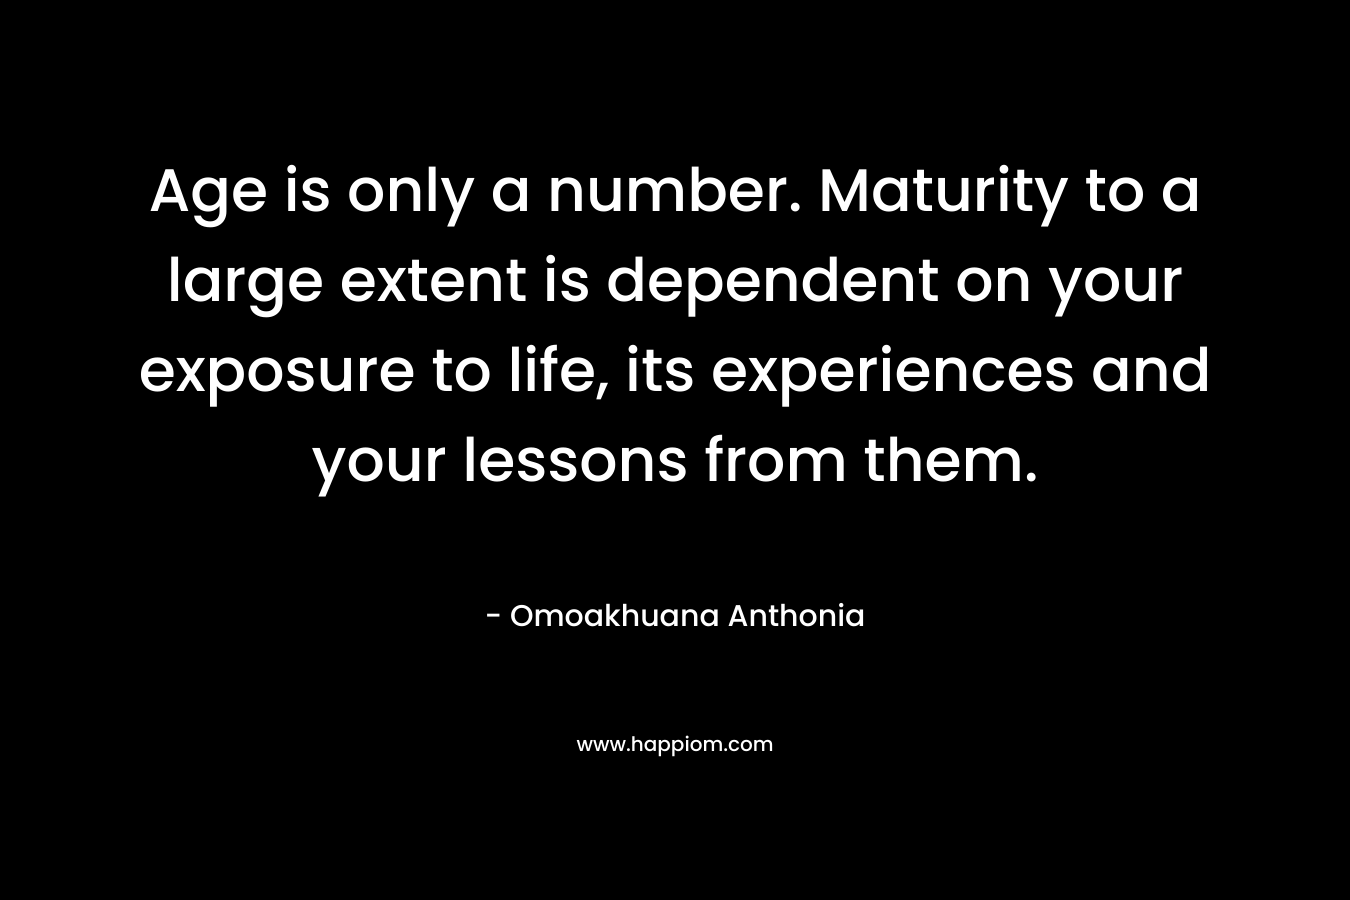 Age is only a number. Maturity to a large extent is dependent on your exposure to life, its experiences and your lessons from them.